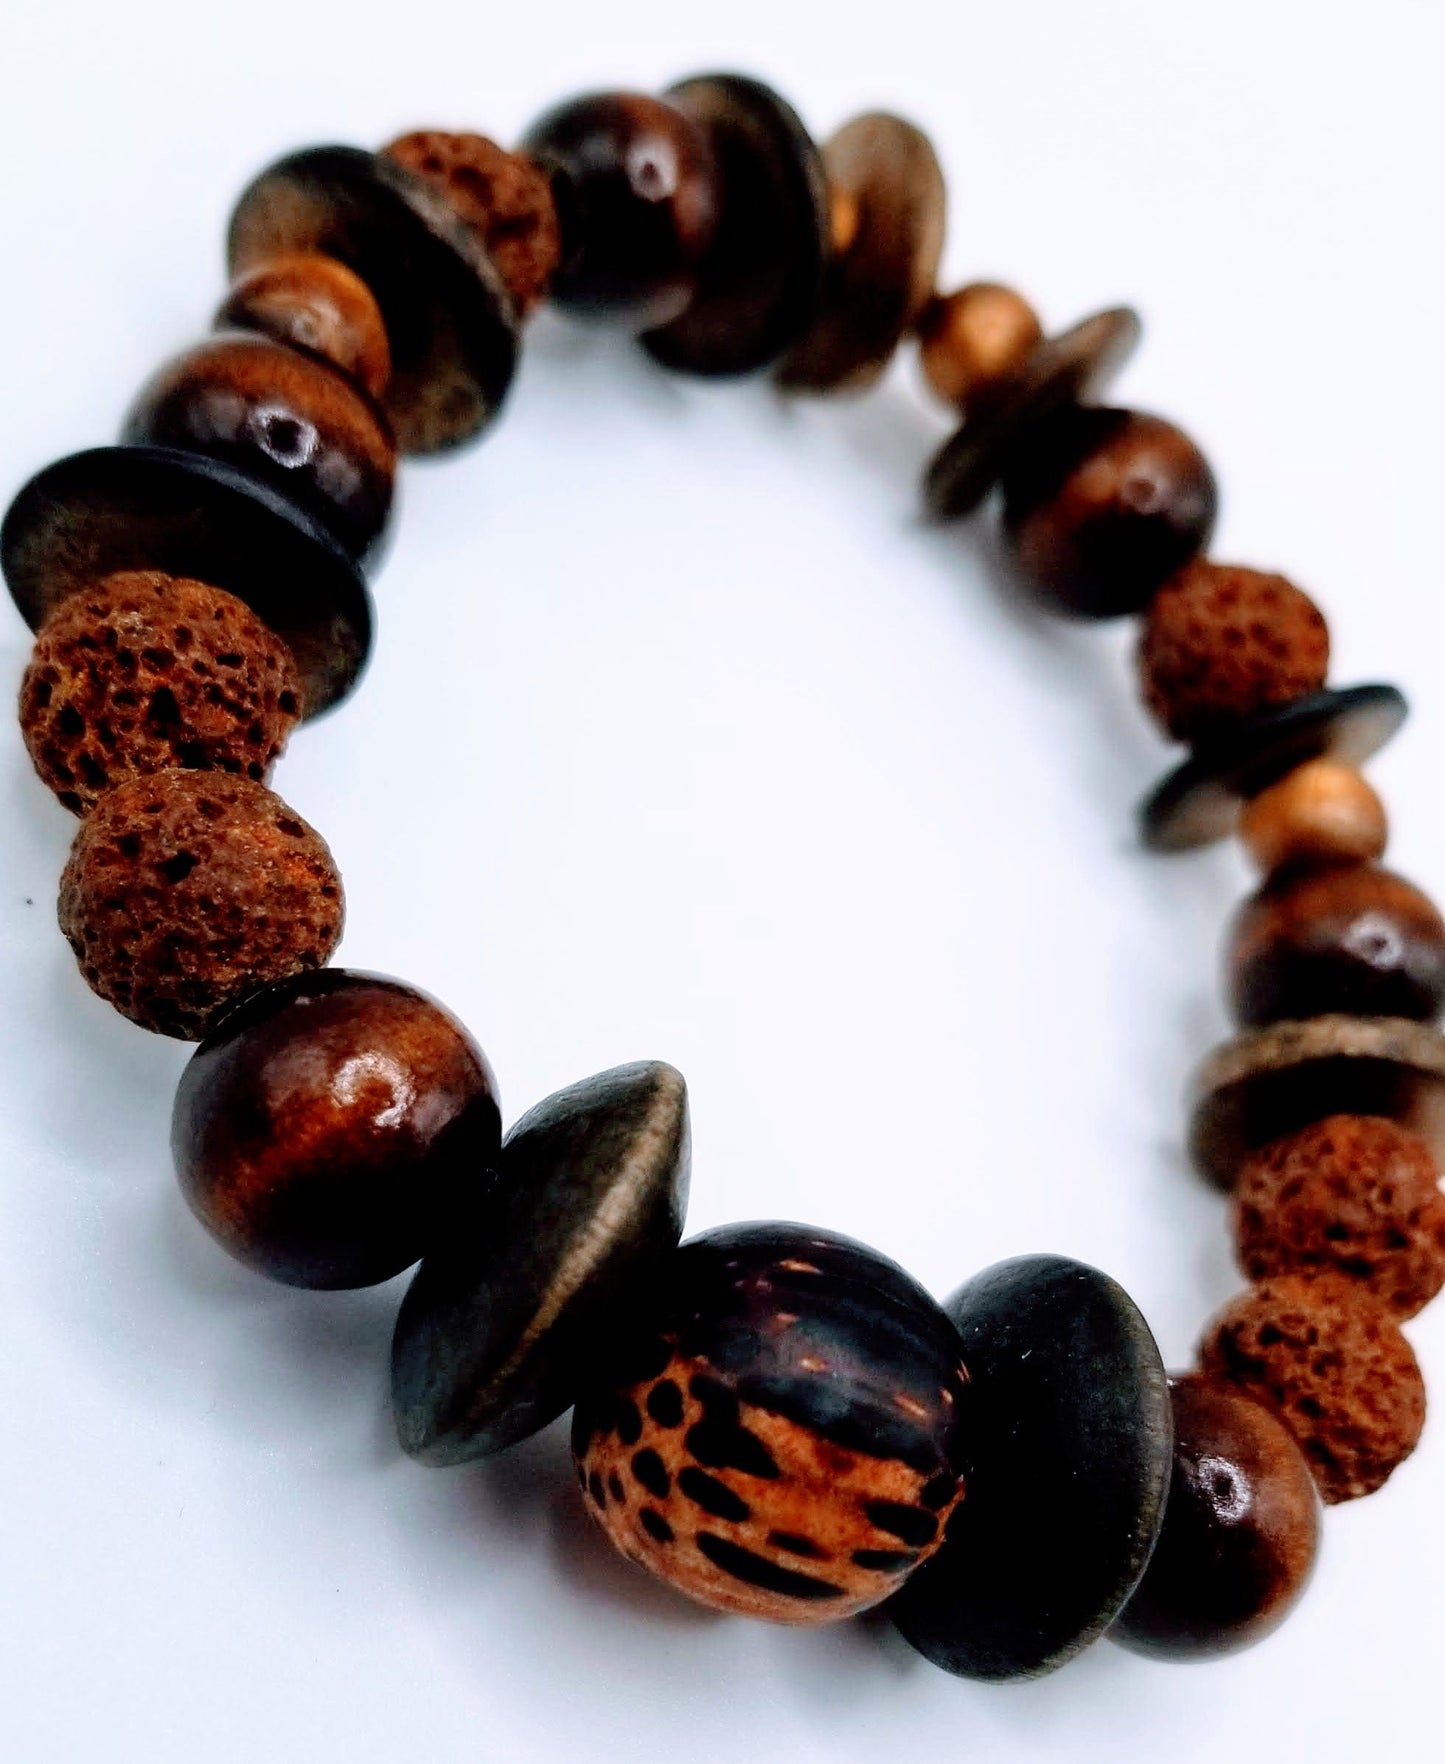 Handcrafted Jewelry By Teri C Beaded Bracelet Embrace Nature's Elegance with our Men's Wood Bead Bracelet